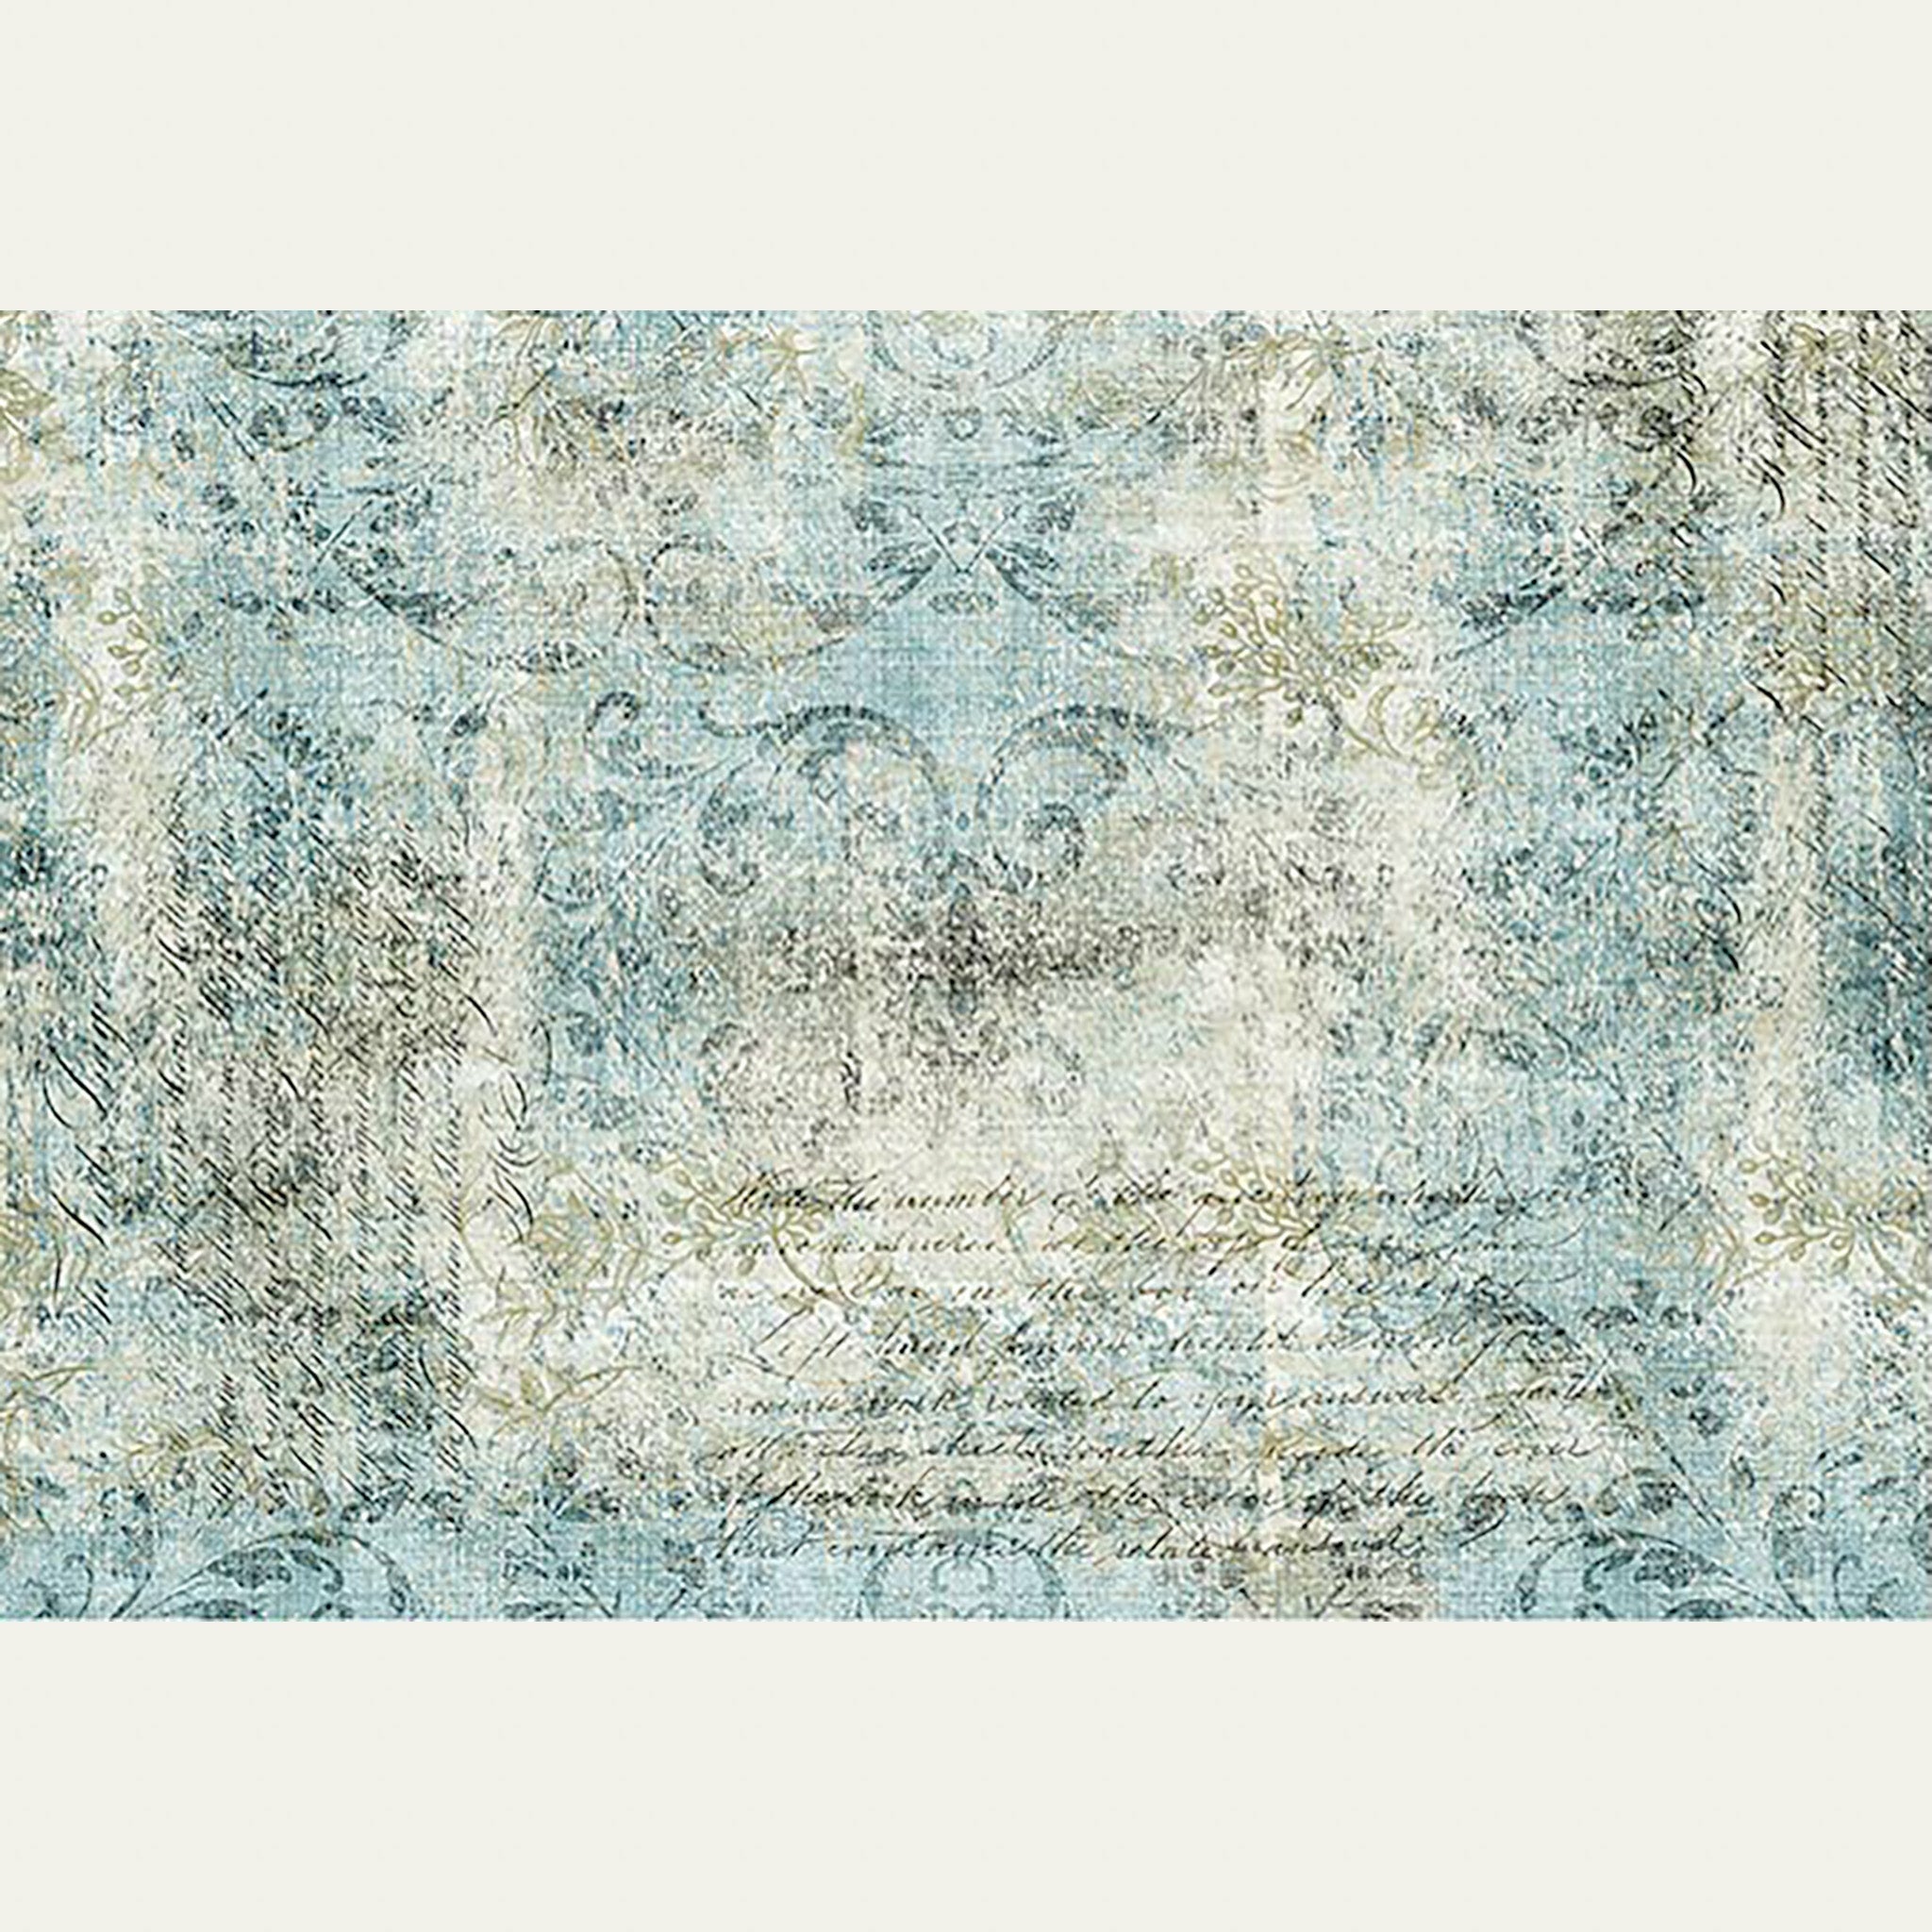 A0 rice decoupage paper of a faded light blue and cream colored fabric that has a worn damask scroll design and script writing. Soft white borders on the top and bottom.